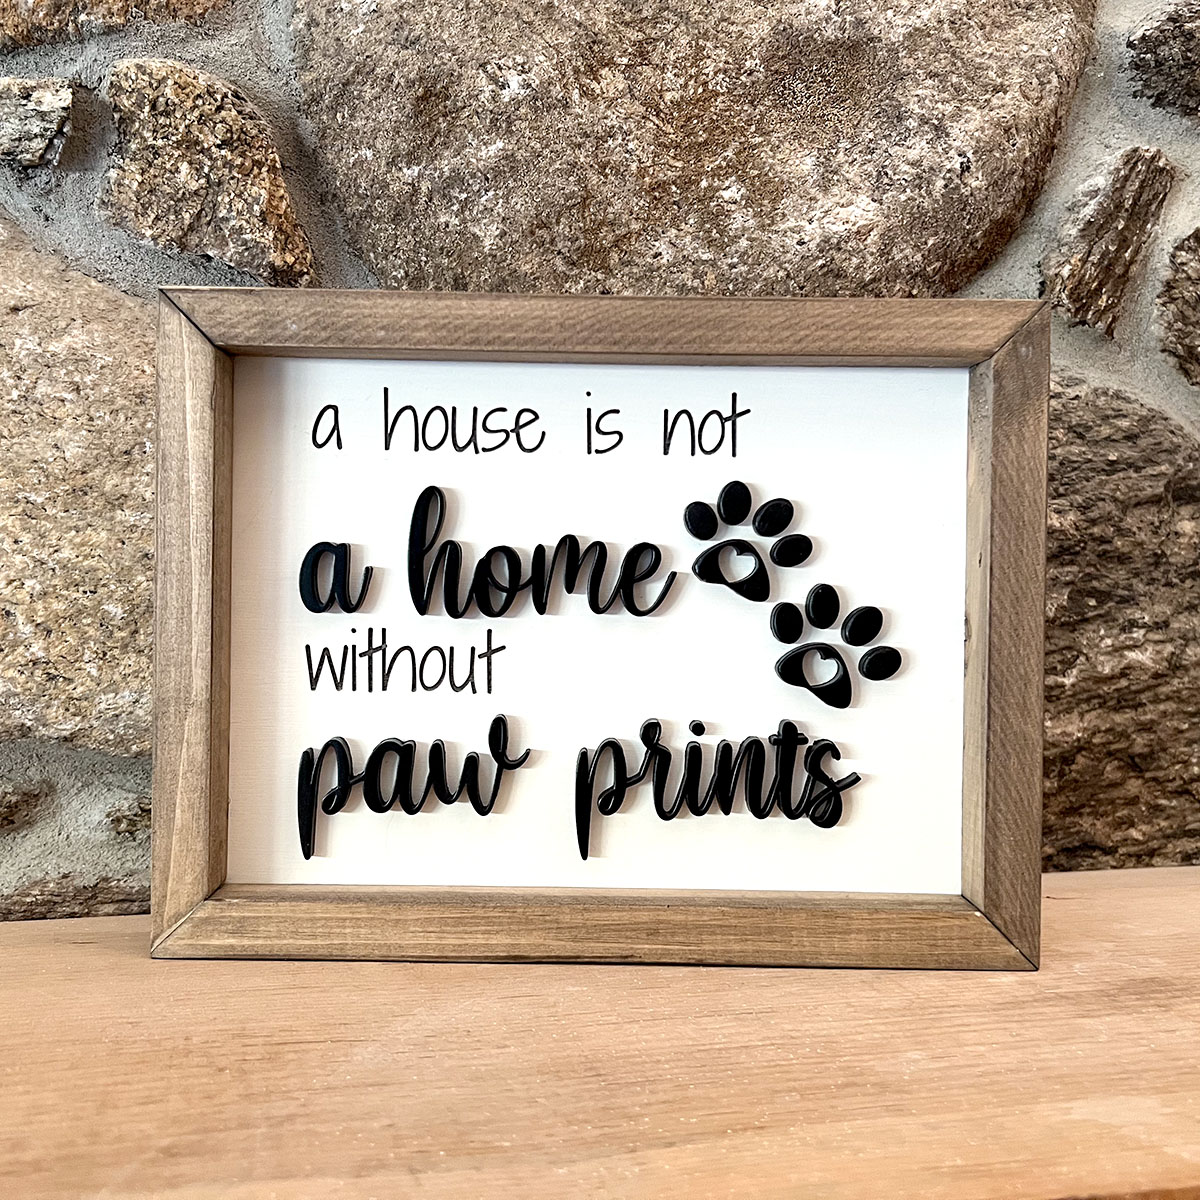 A house is not a home without paw prints